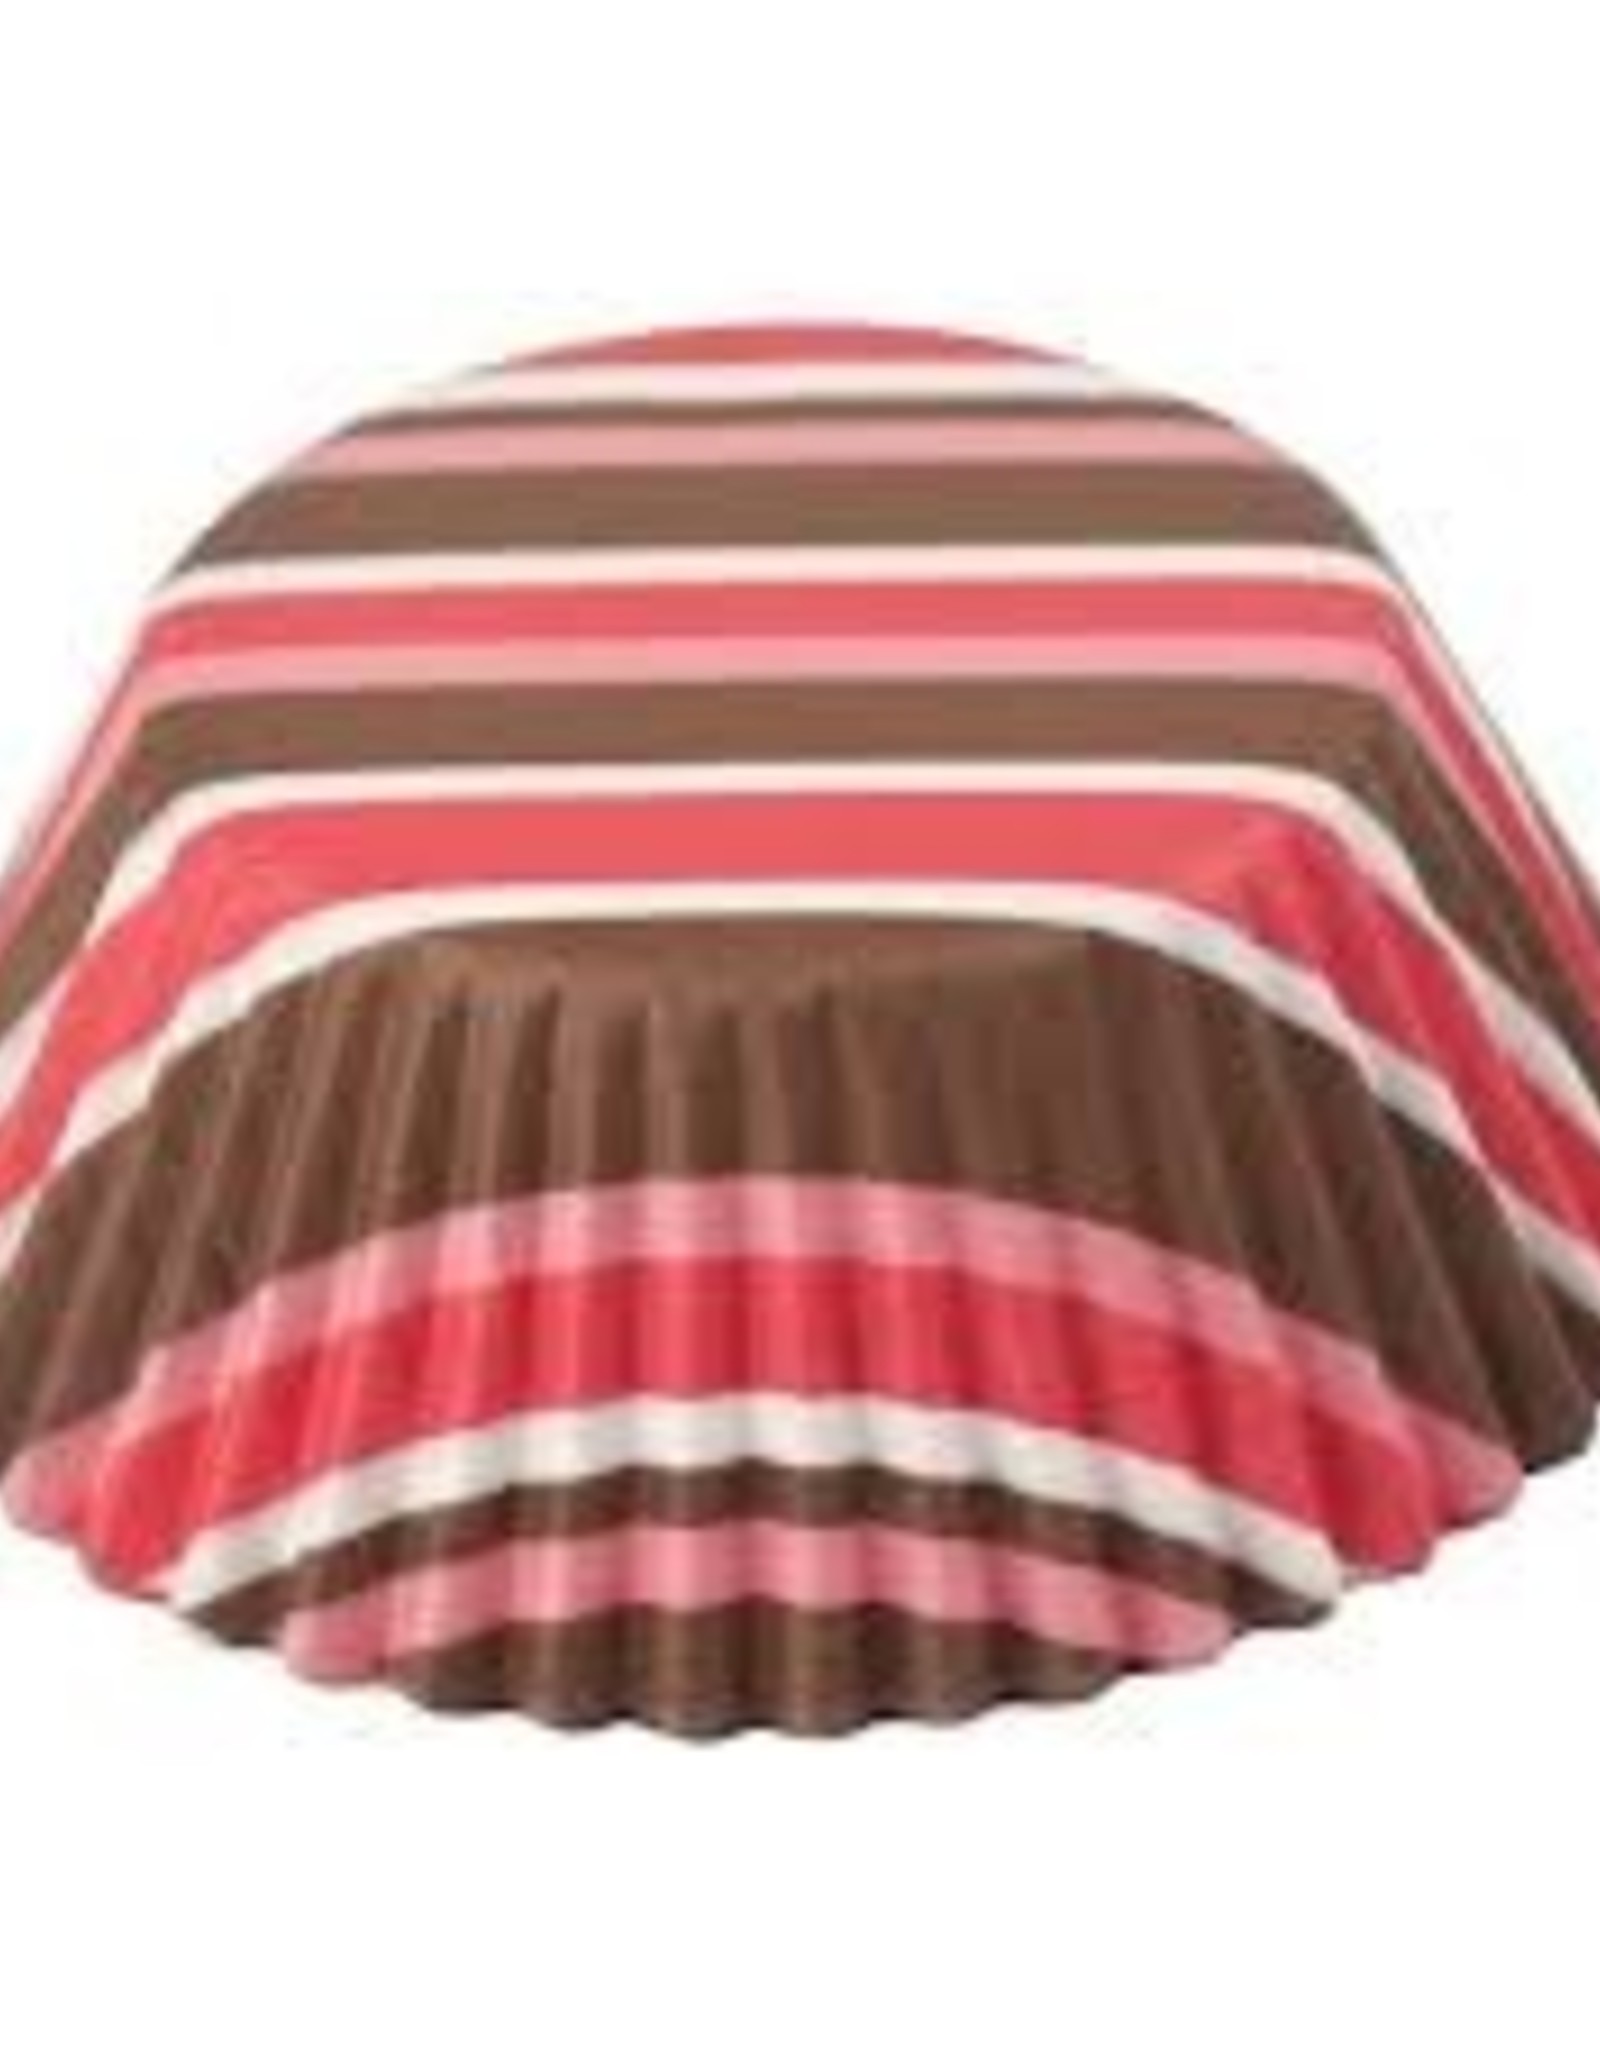 Pink and Brown Stripe Baking Cups (50ct)